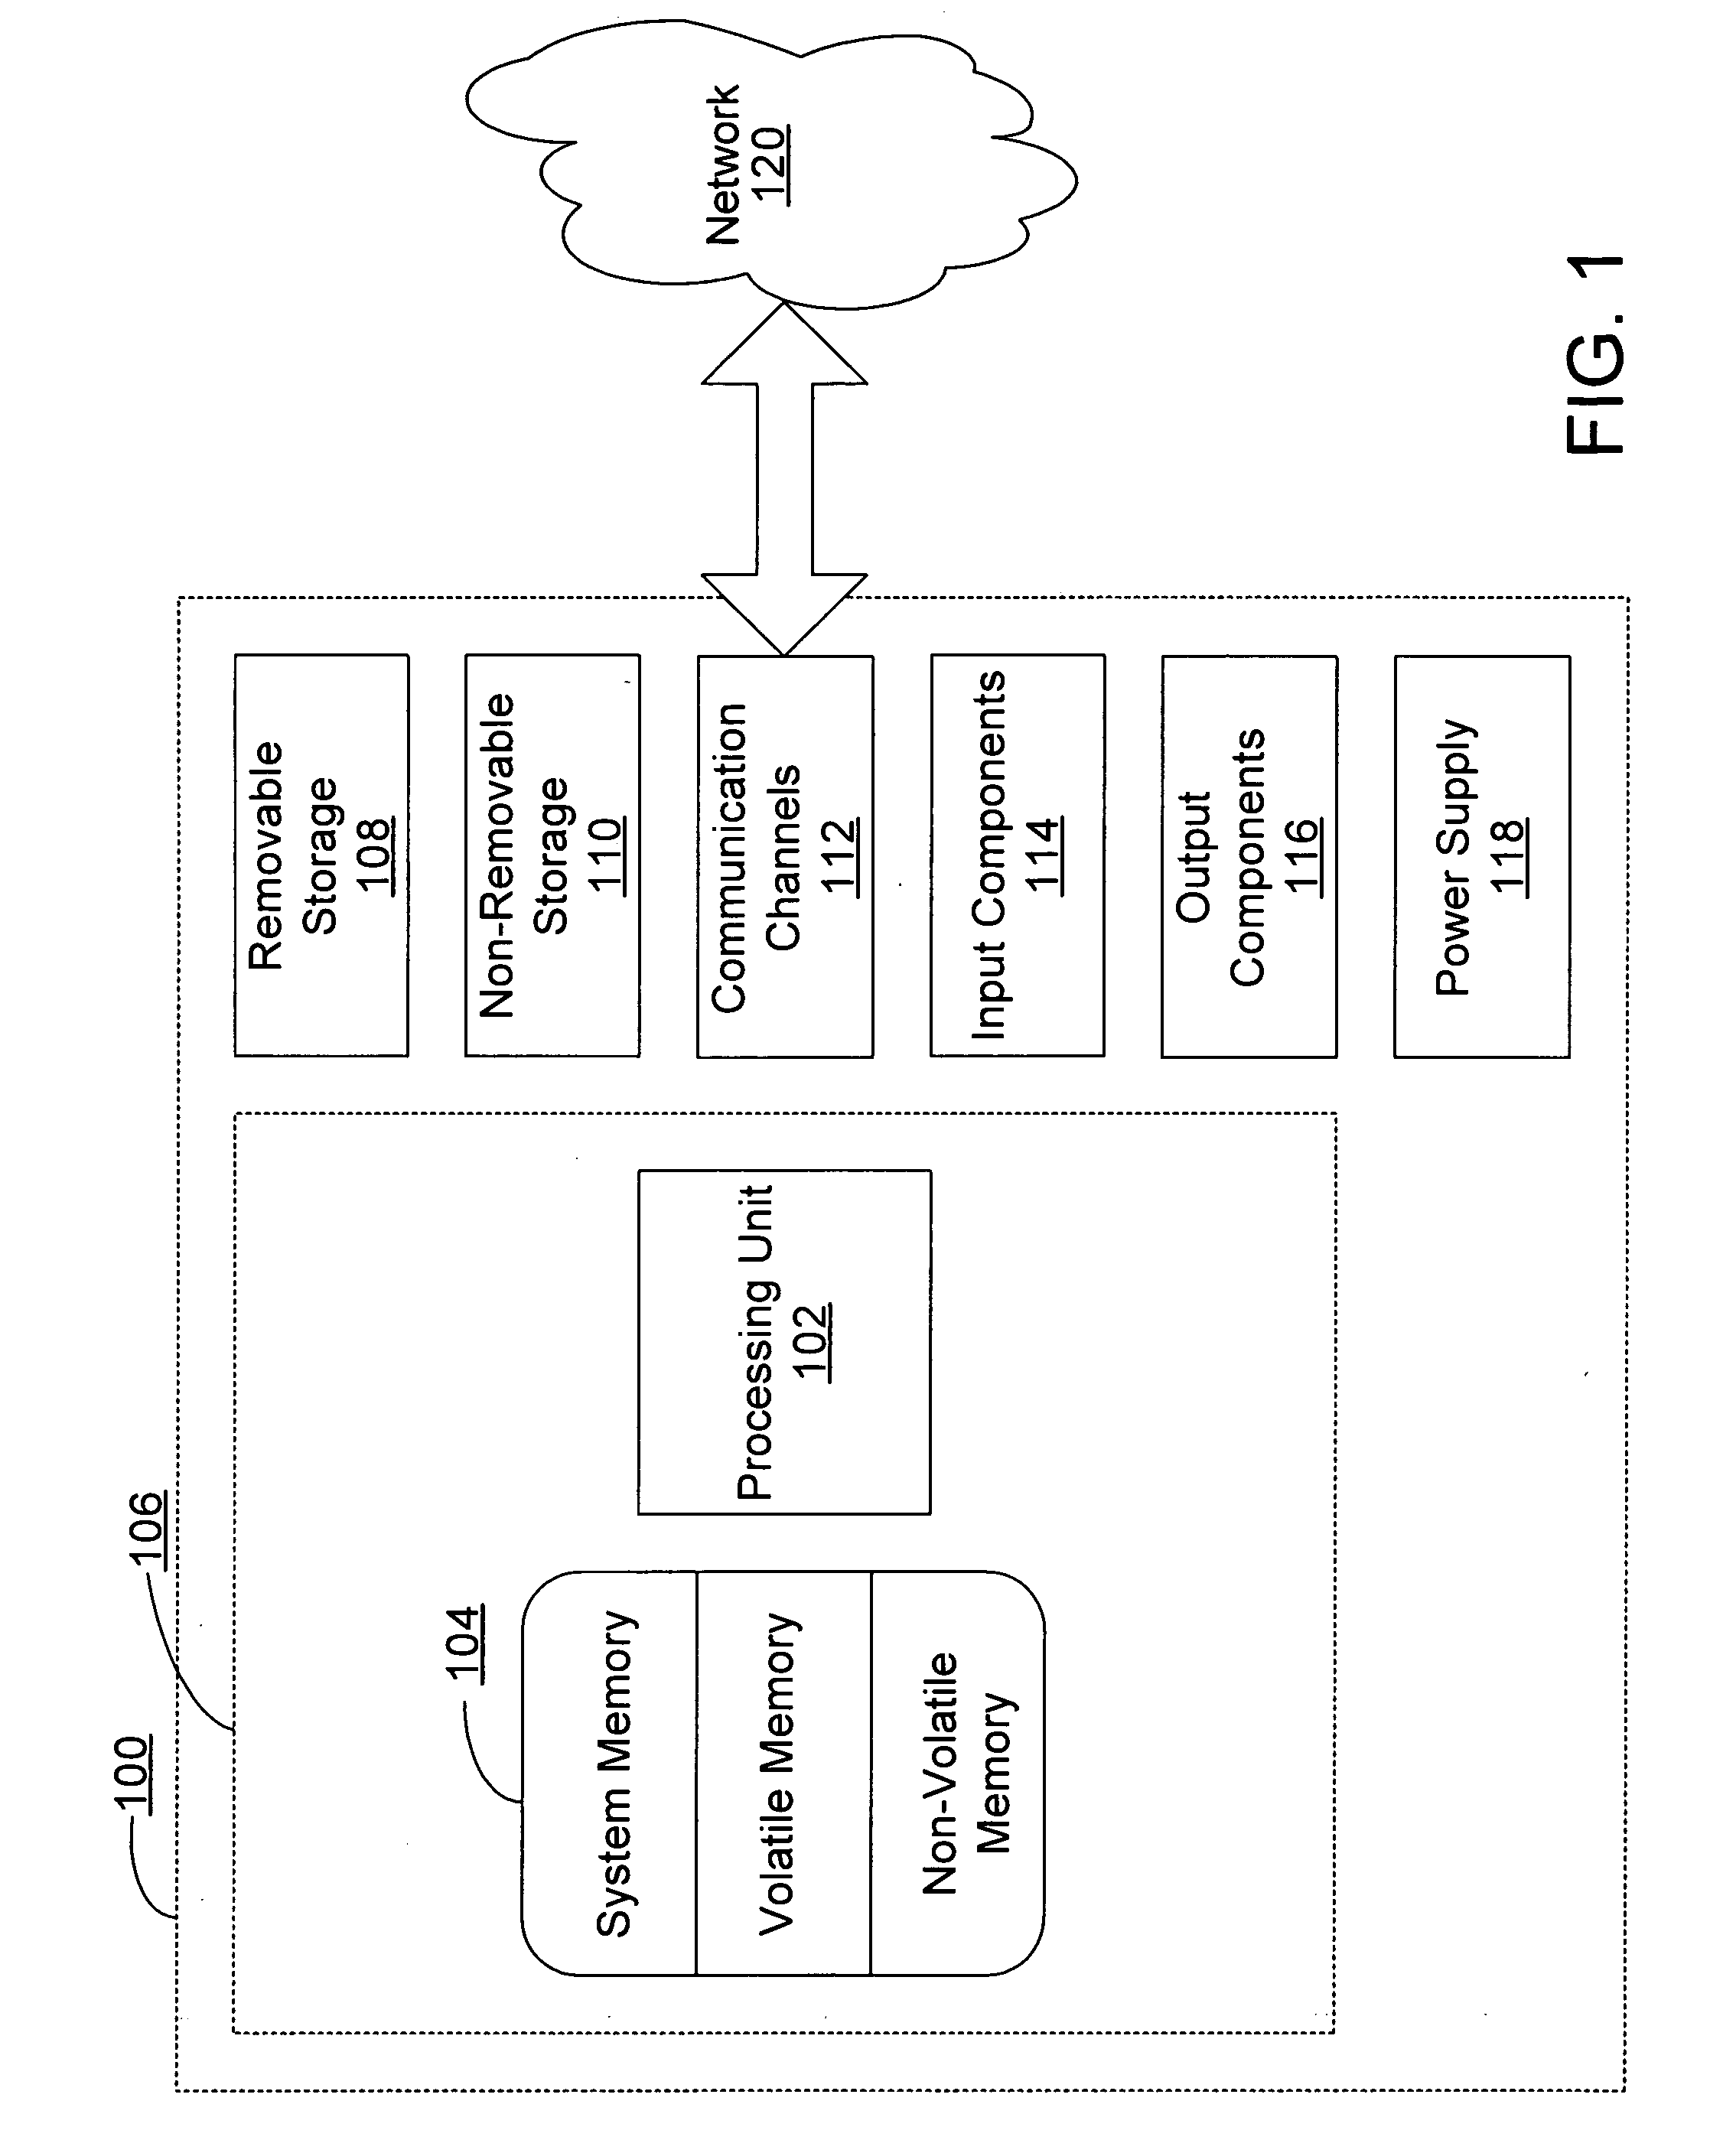 Model and method for computing performance bounds in multi-hop wireless networks